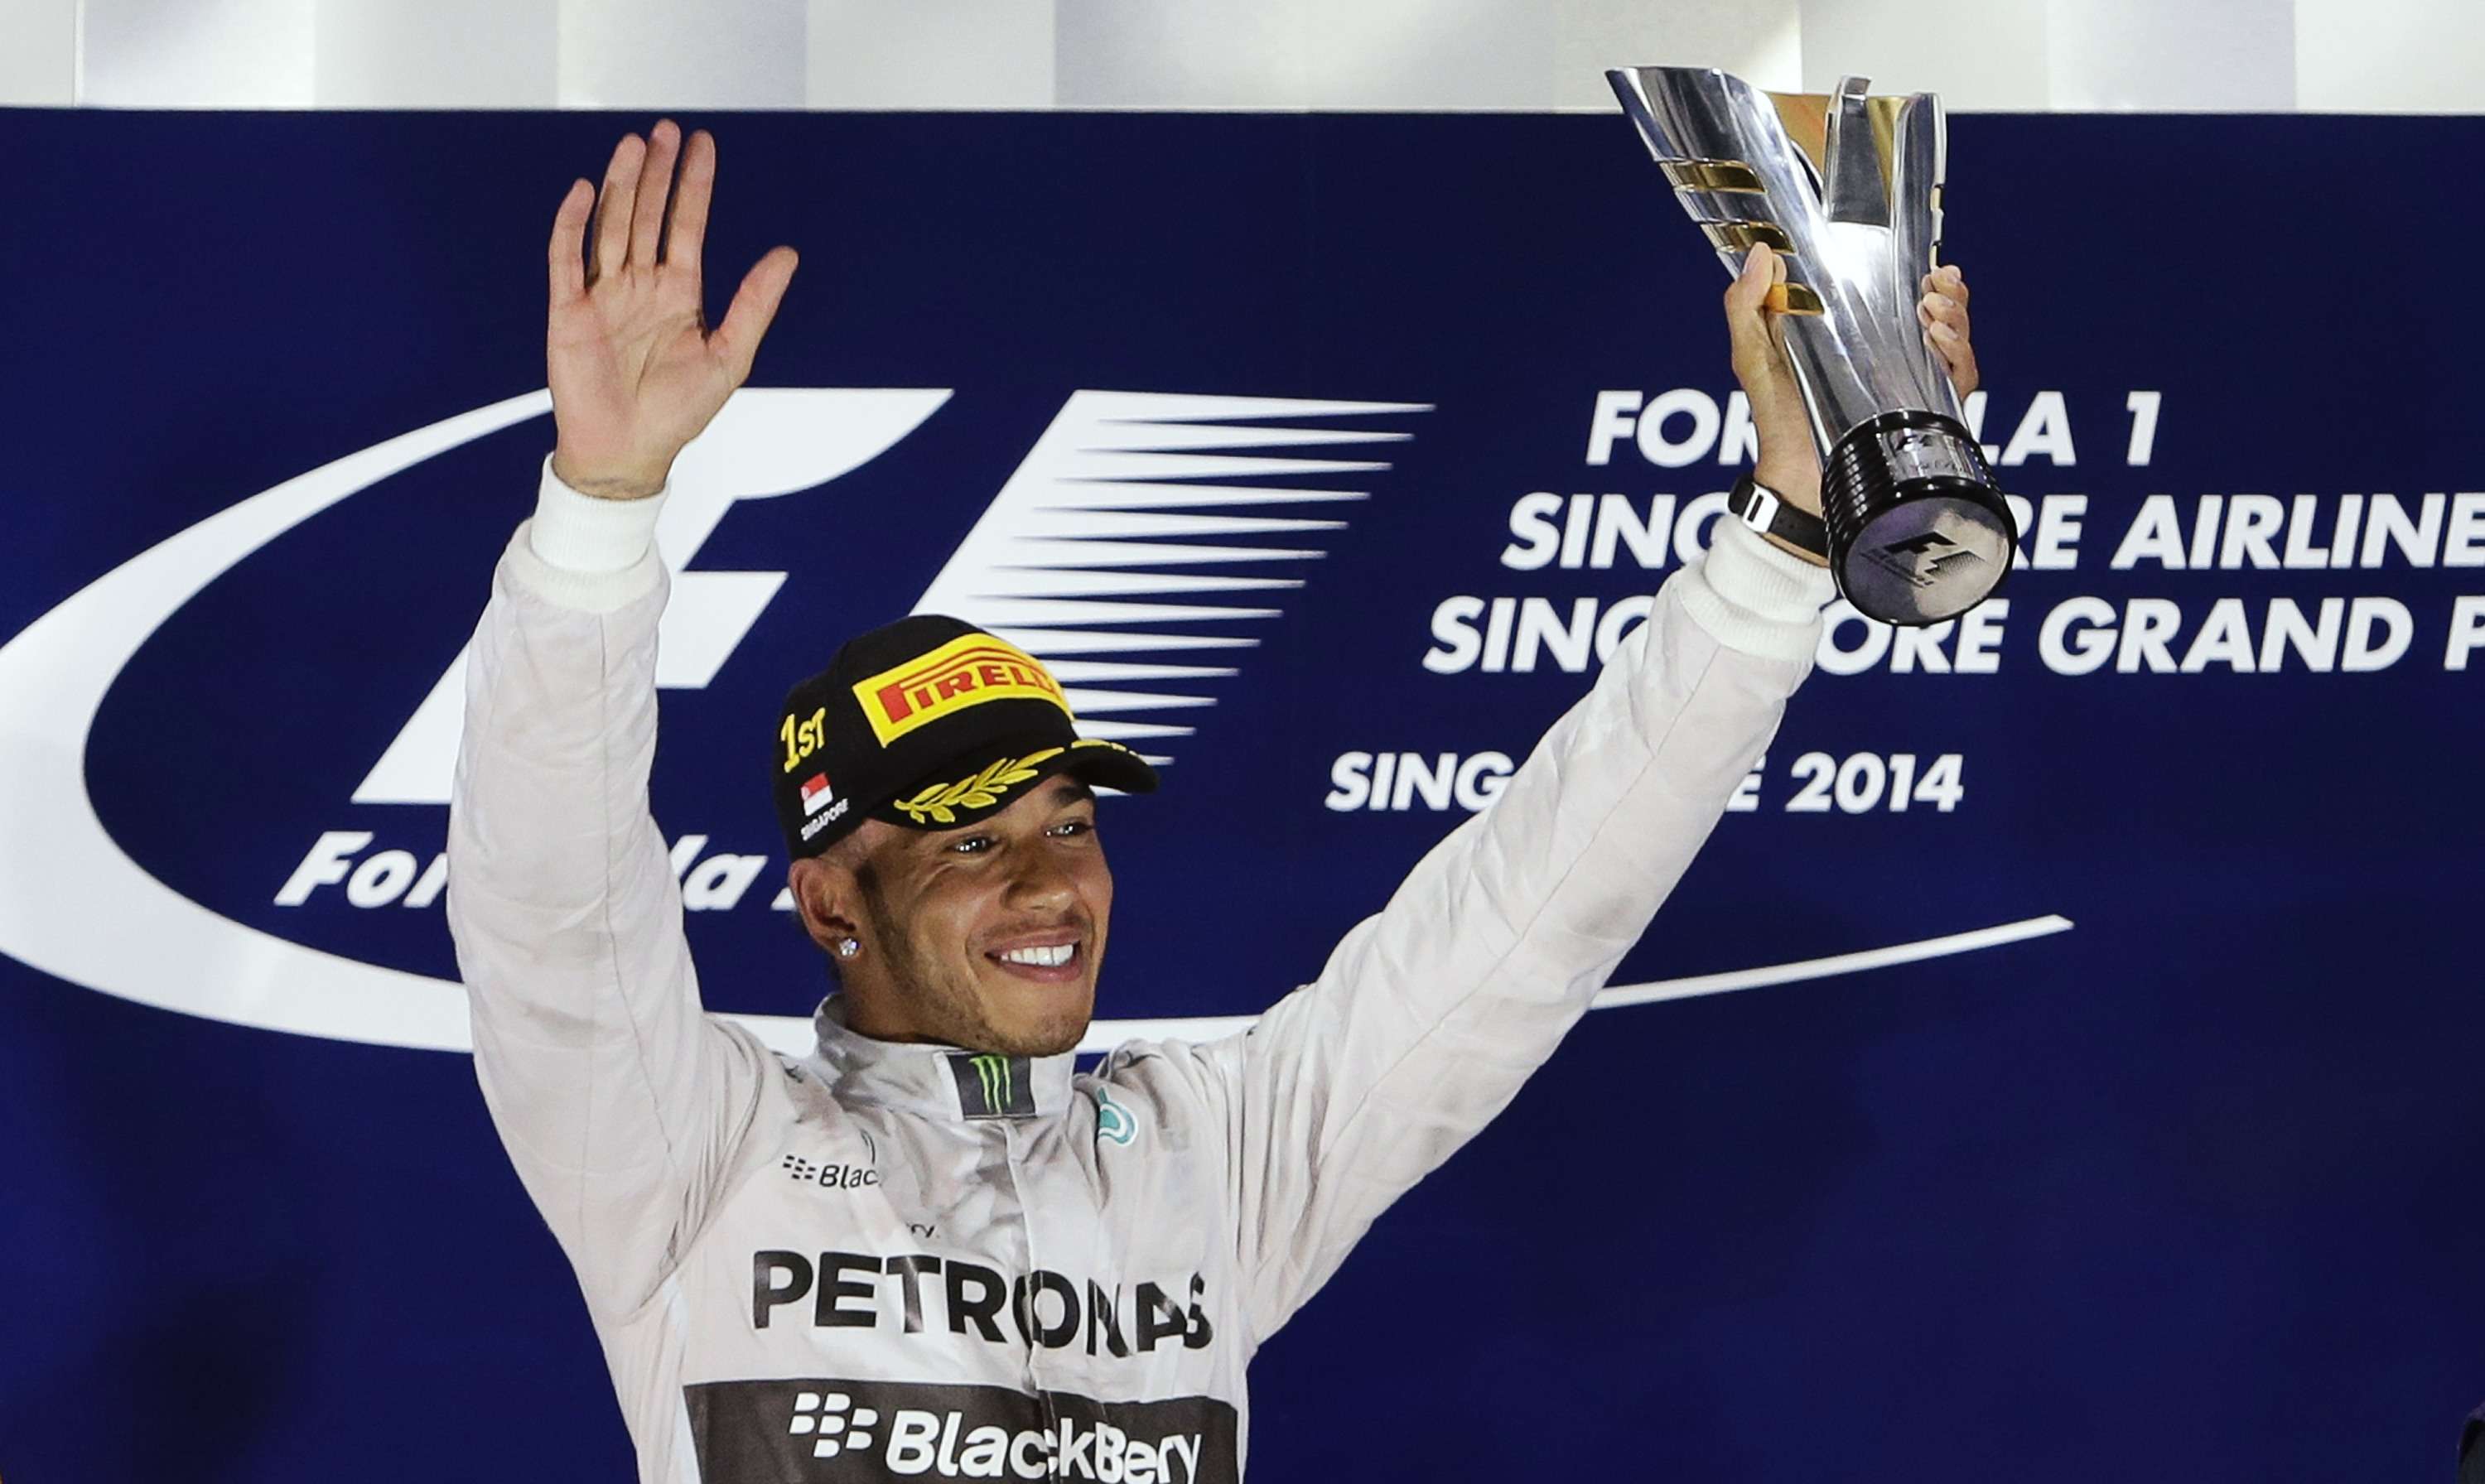 Lewis Hamilton says the Singapore Grand Prix is challenging. Photo: Reuters